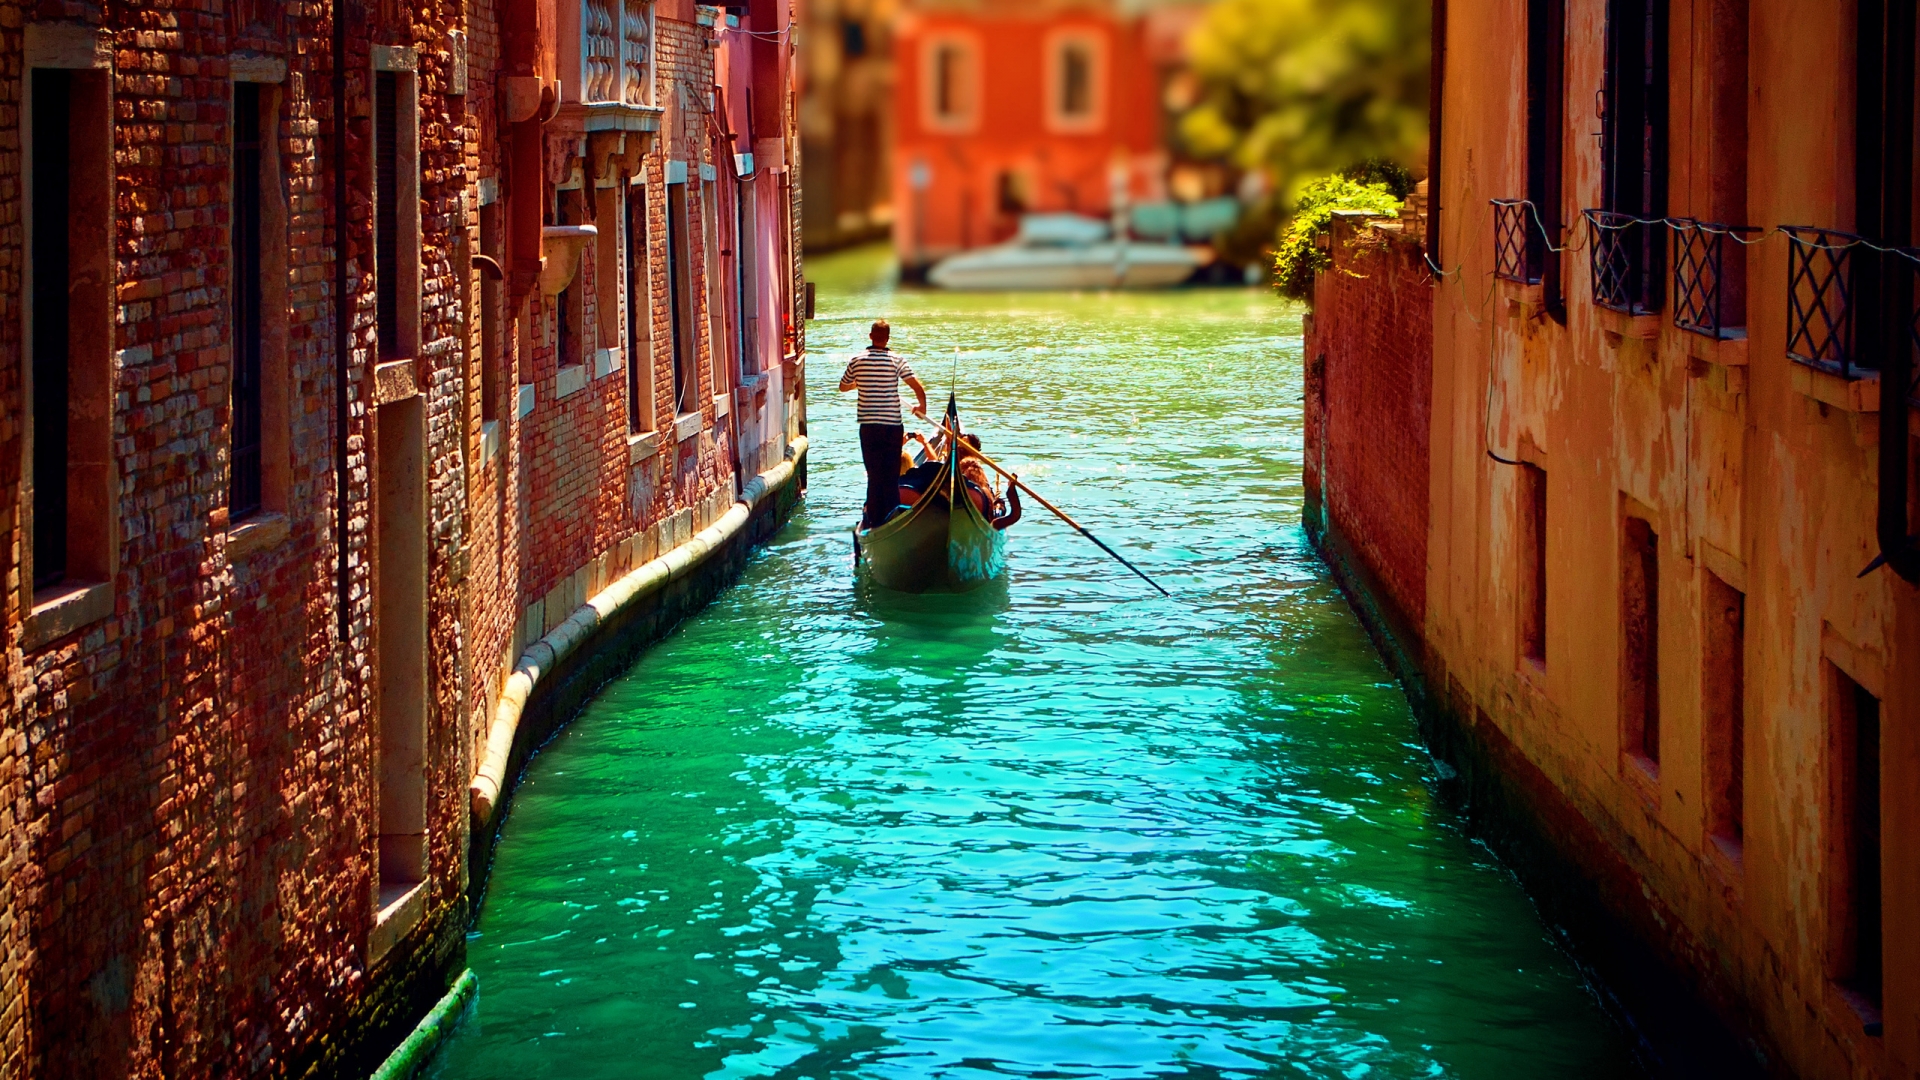 Venice Canal for 1920 x 1080 HDTV 1080p resolution